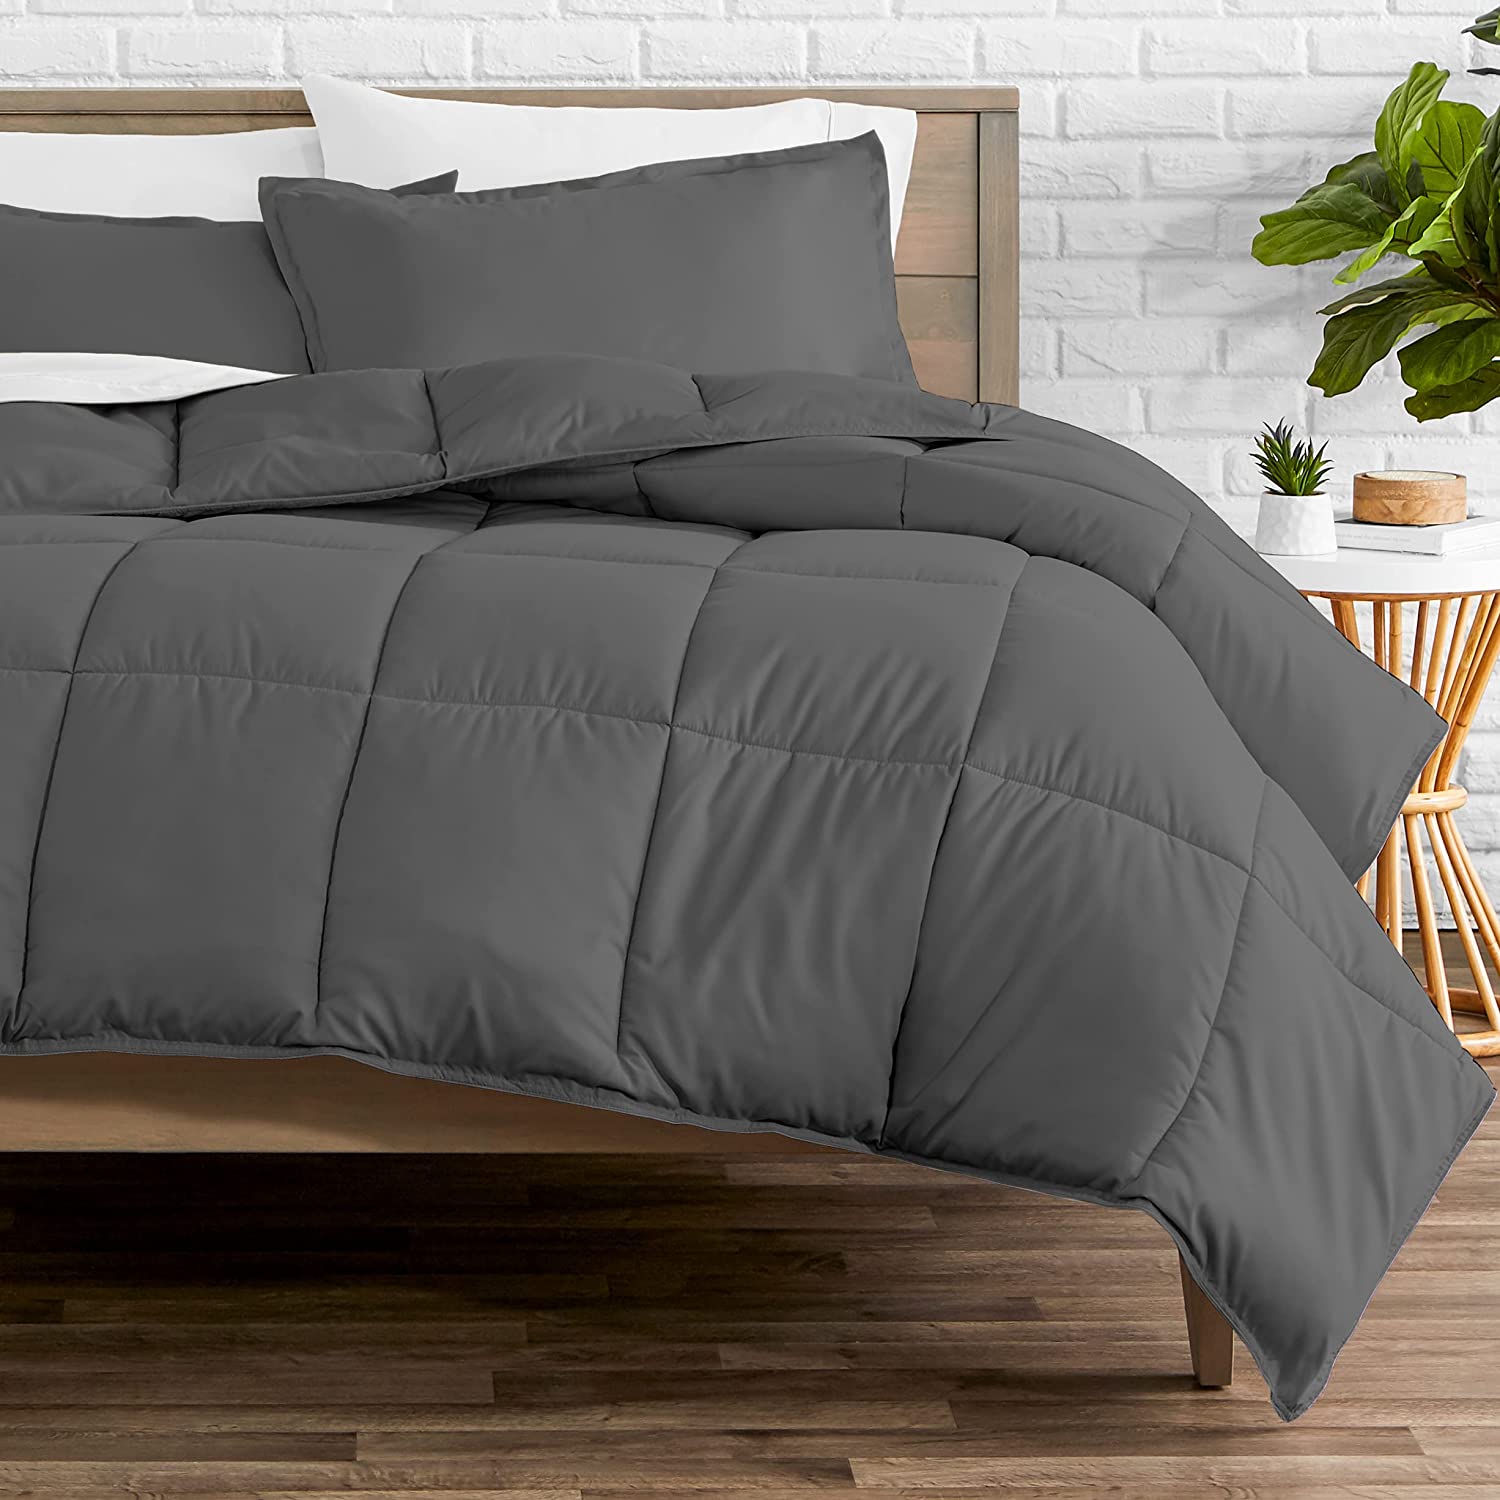 The Best Twin Comforter Sets December, X Long Twin Bed Comforters